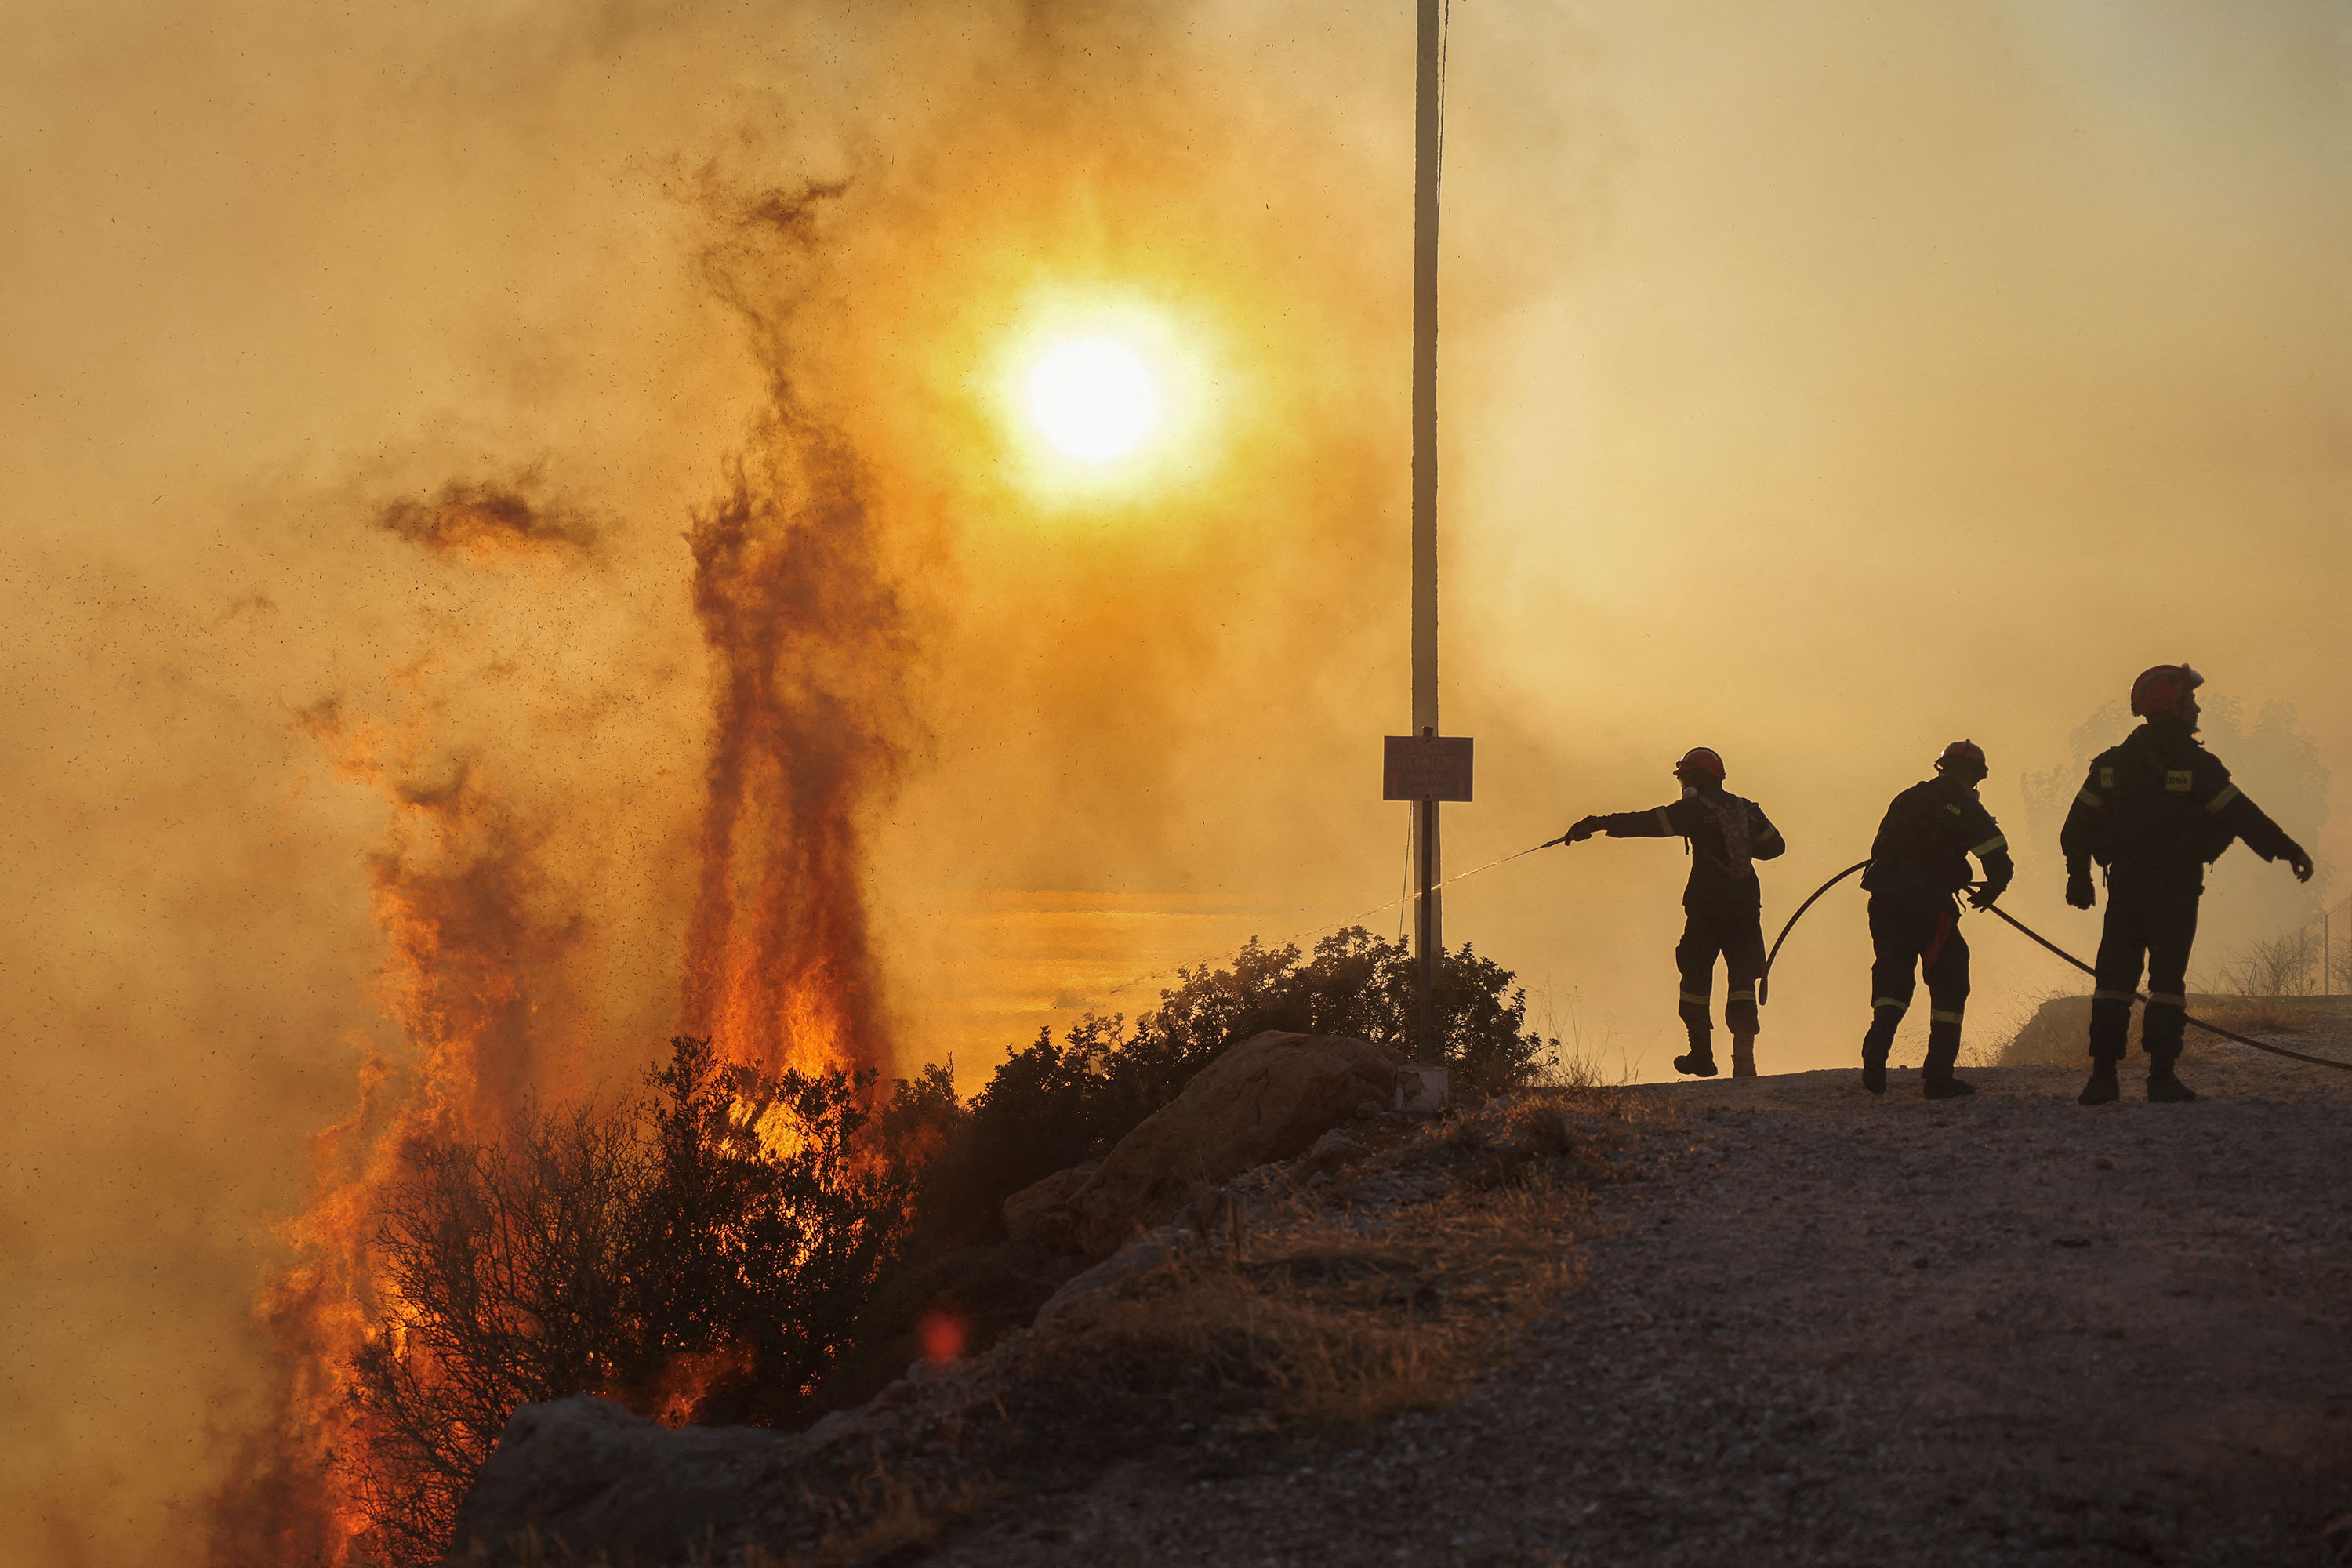 Firefighters try to extinguish a wildfire burning in Saronida, Greece, on Monday.